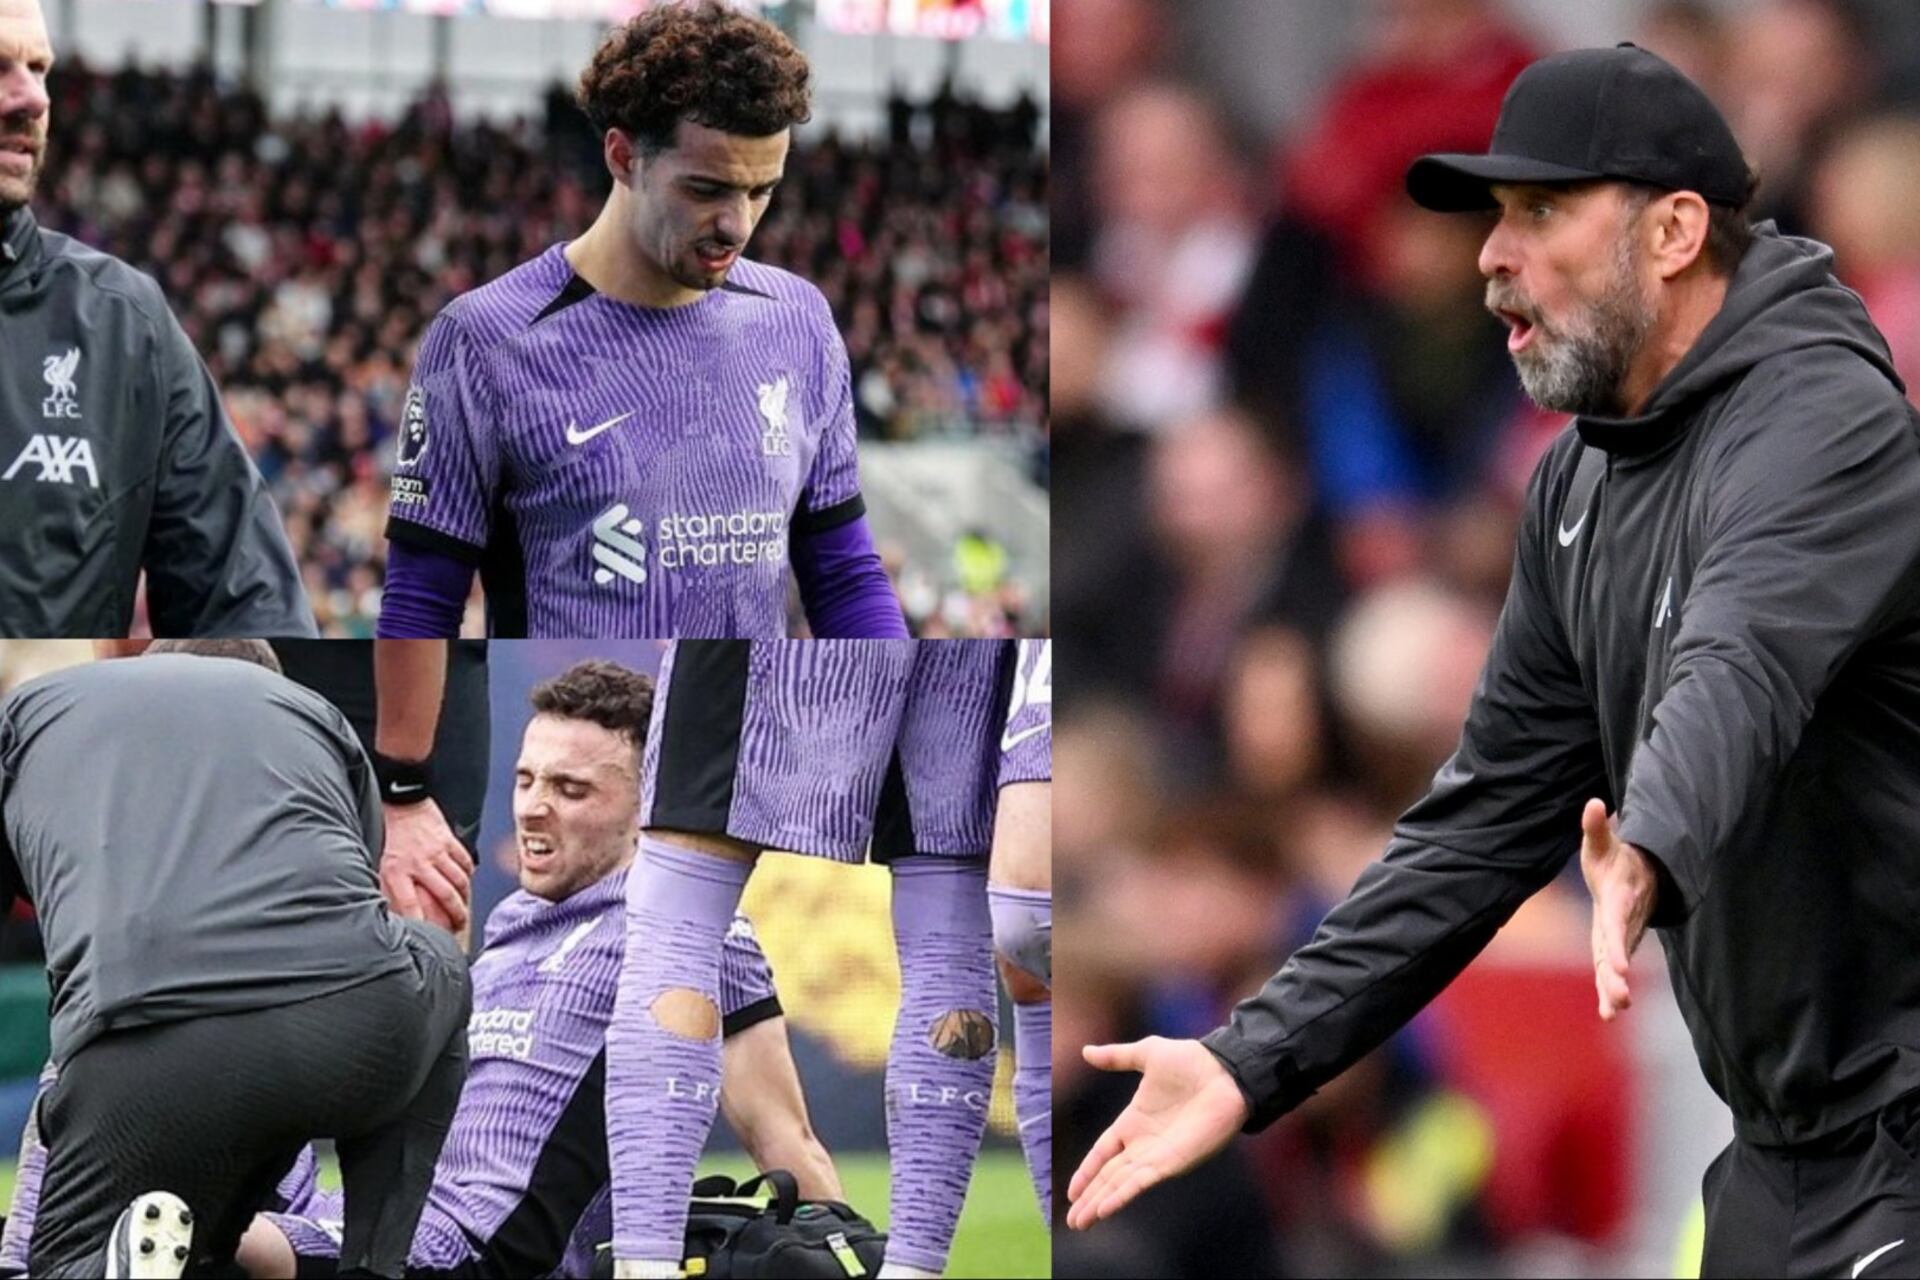 As Liverpool get an impressive win against Brentford, Klopp gives fans bad news